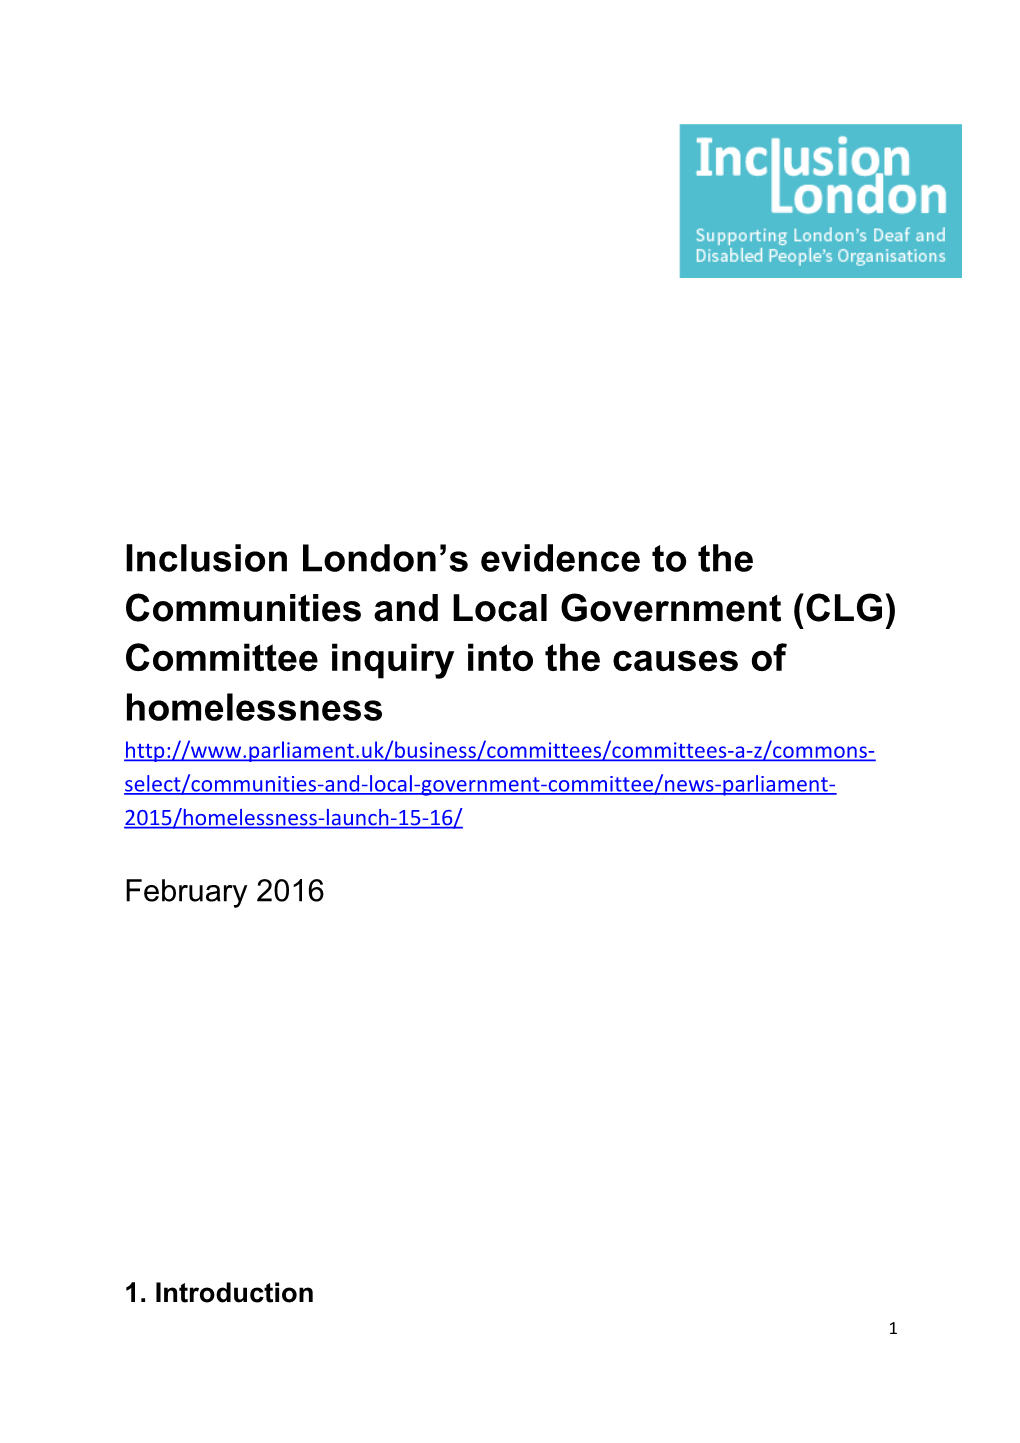 Inclusion London S Evidence to the Communities and Local Government (CLG) Committee Inquiry